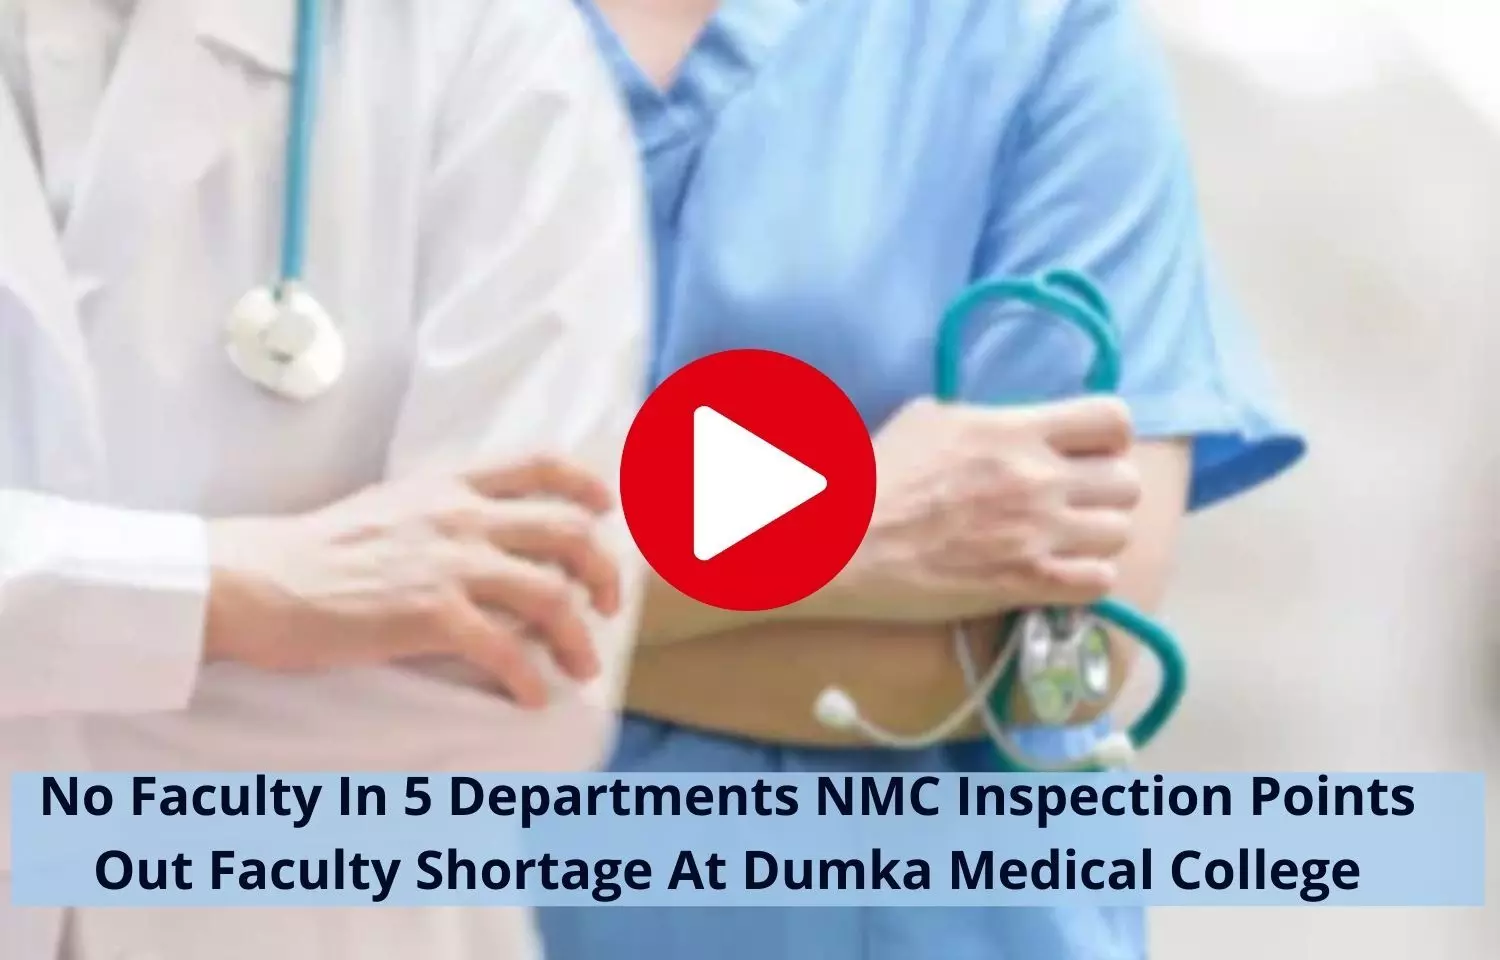 Severe faculty shortage at Dumka Medical College